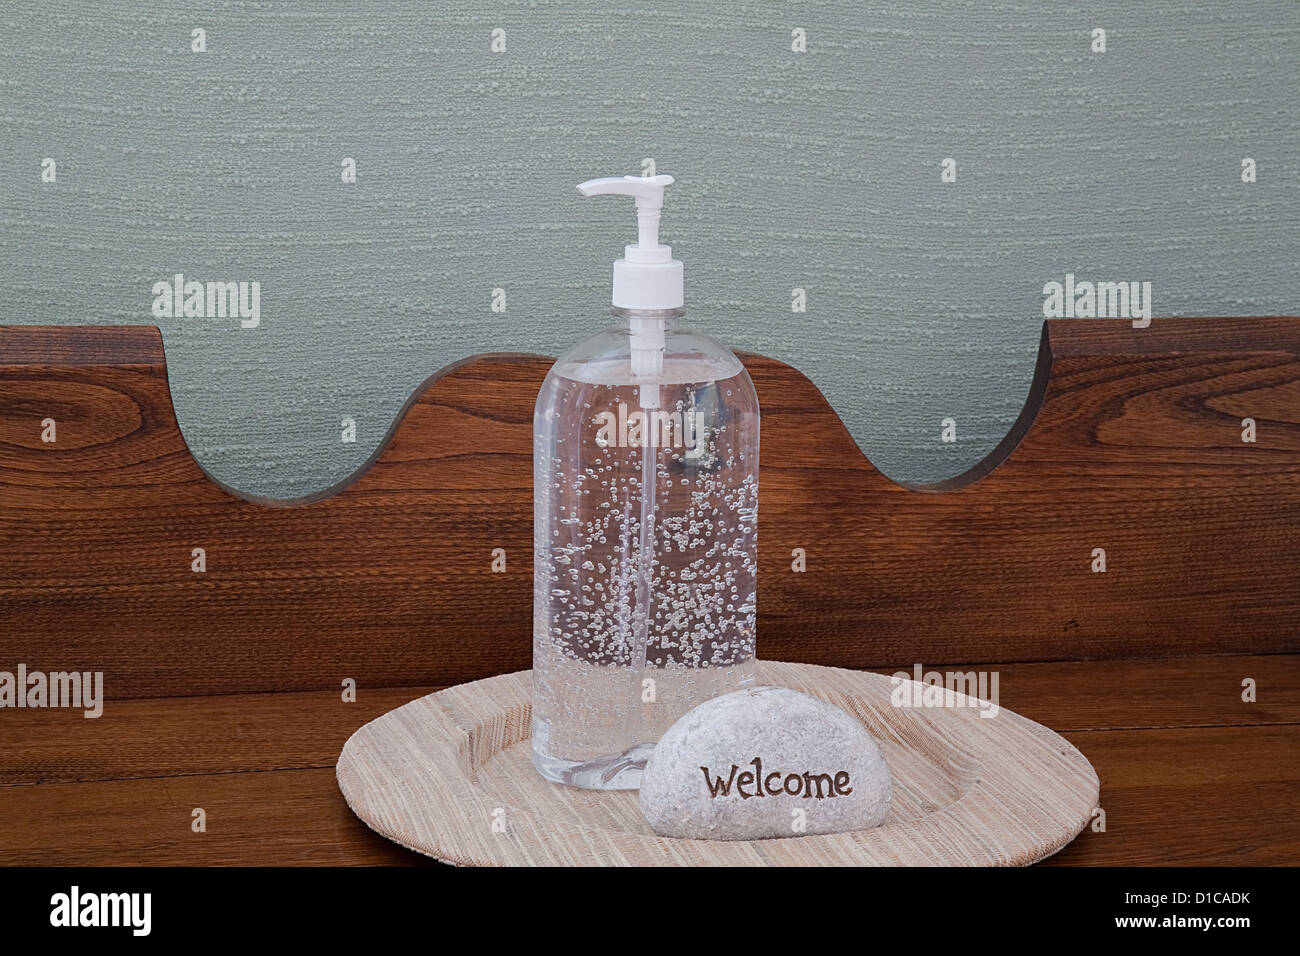 Hand Sanitizer and welcome sign on beige linen plate, antique oak table with green linen background. Help yourself stay healthy. Stock Photo